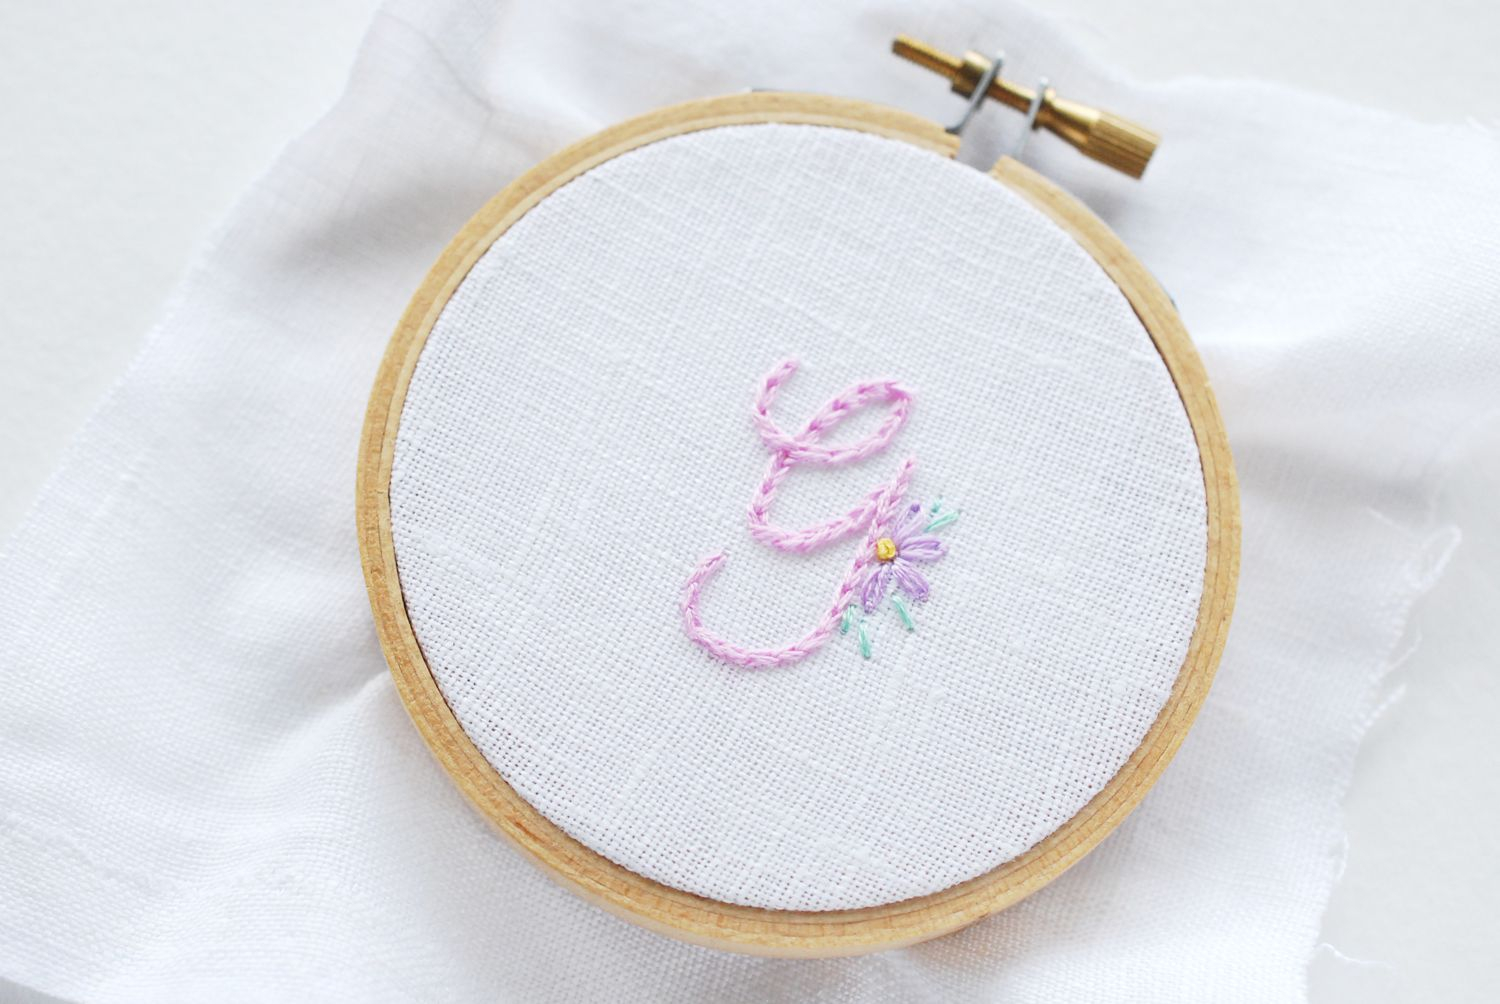 Handkerchief Embroidery Patterns Free Alphabet Pattern For Monogram Embroidery